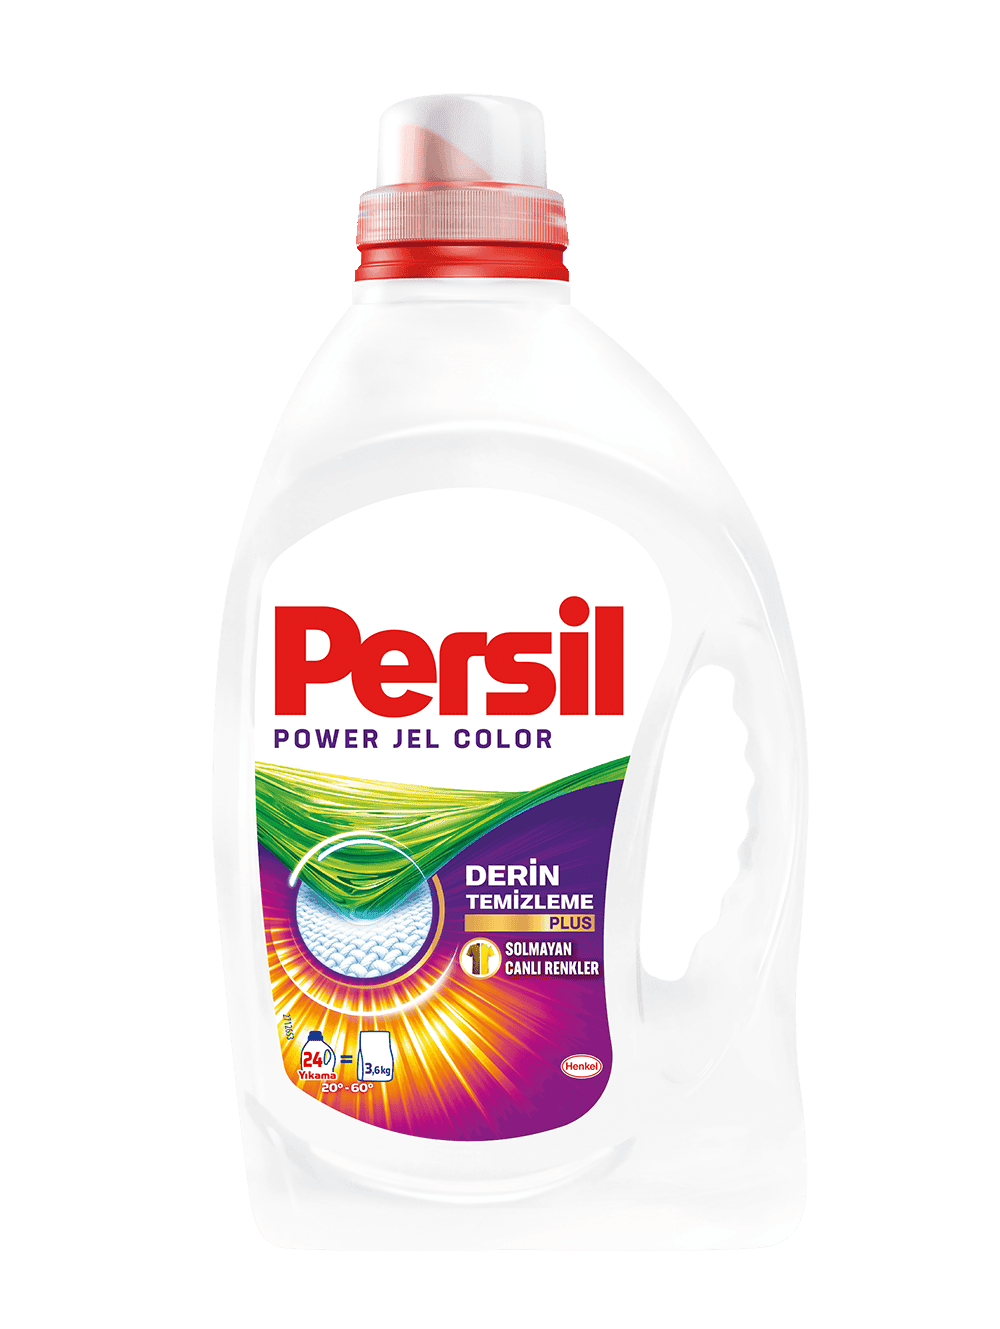 Persil Power Jel Color 24 Wl